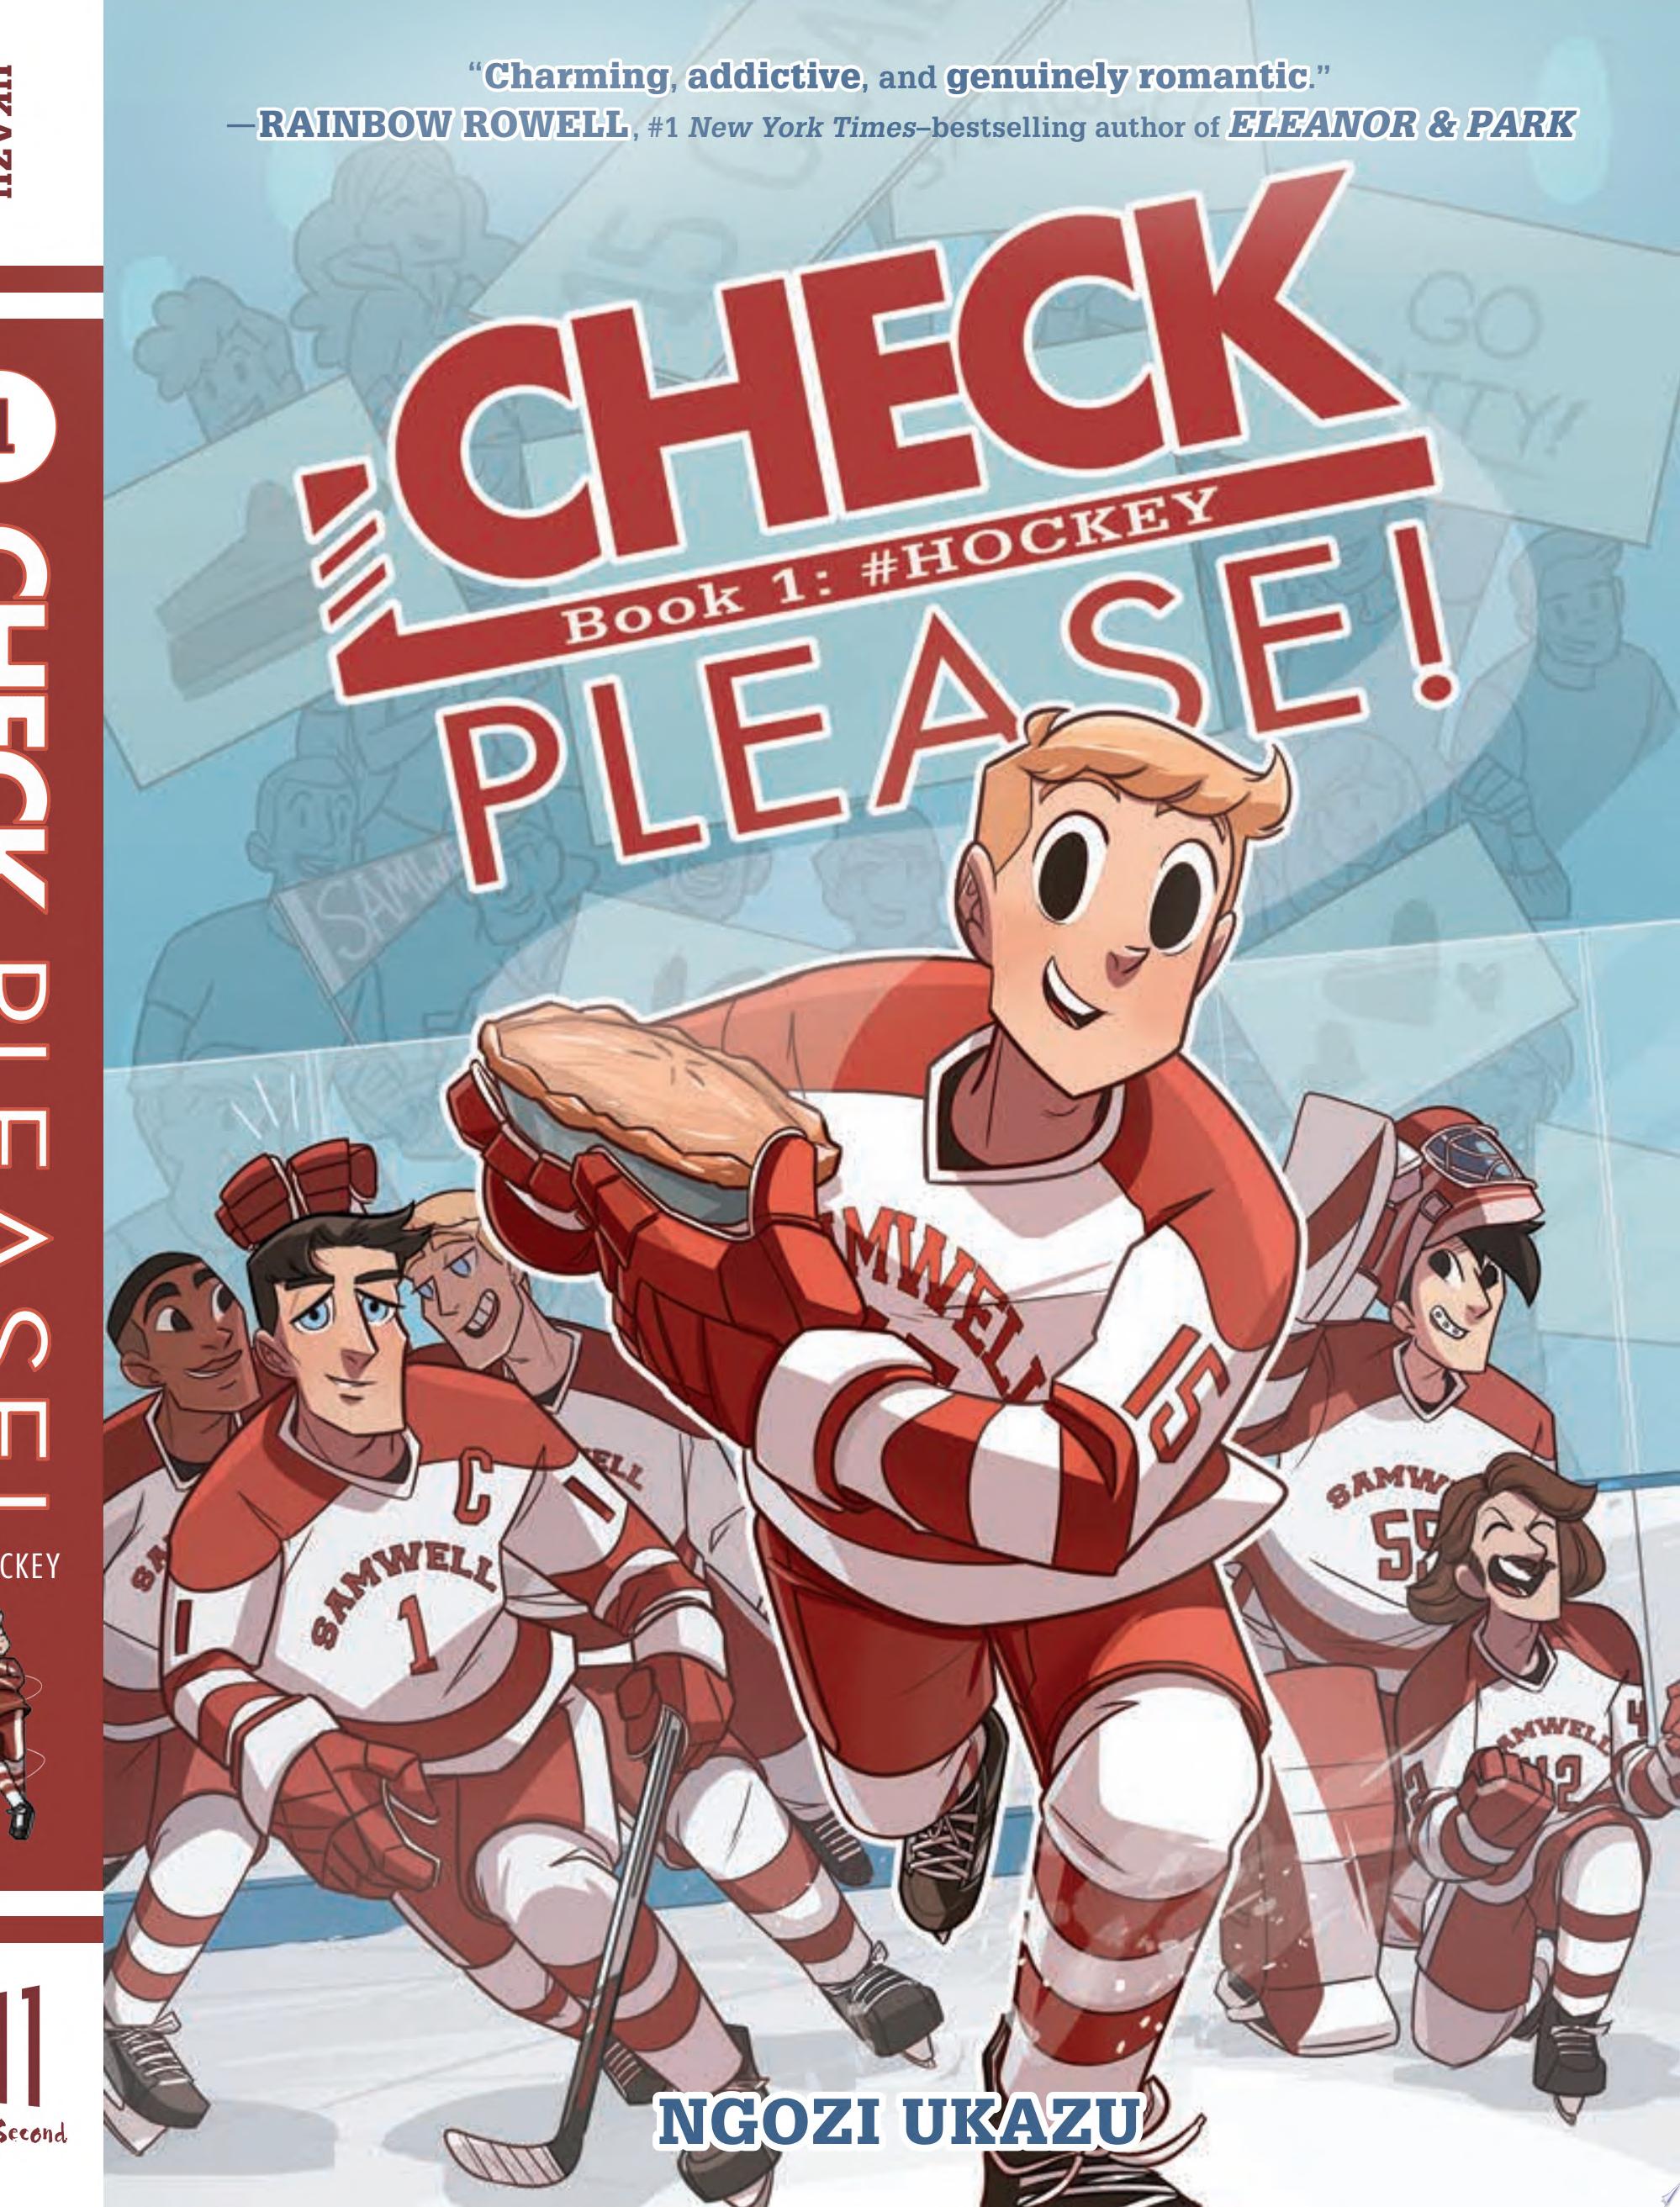 Image for "Check, Please! Book 1: # Hockey"